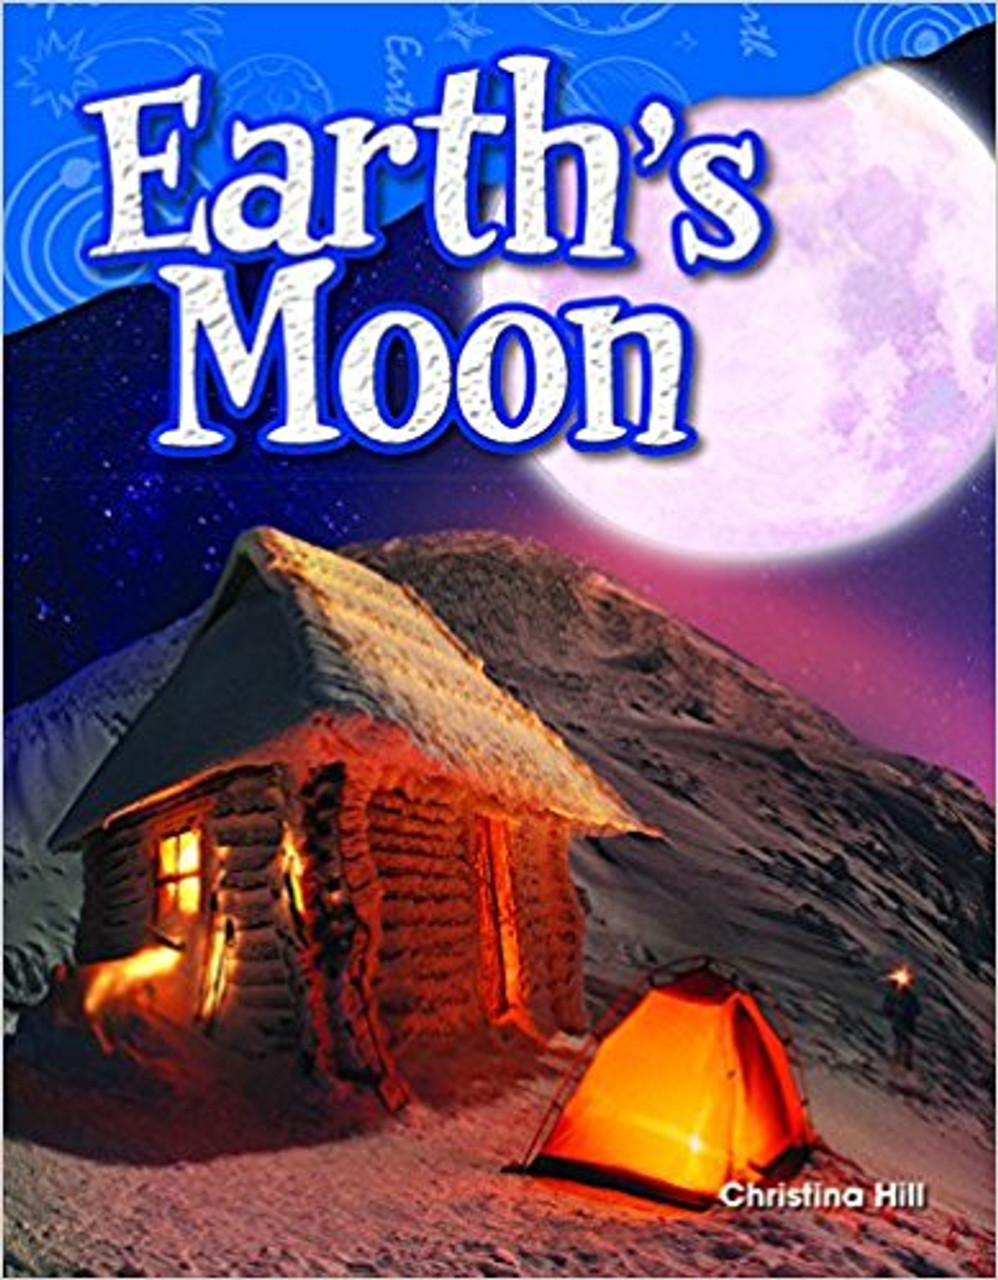 Earth's Moon by Christina Hill